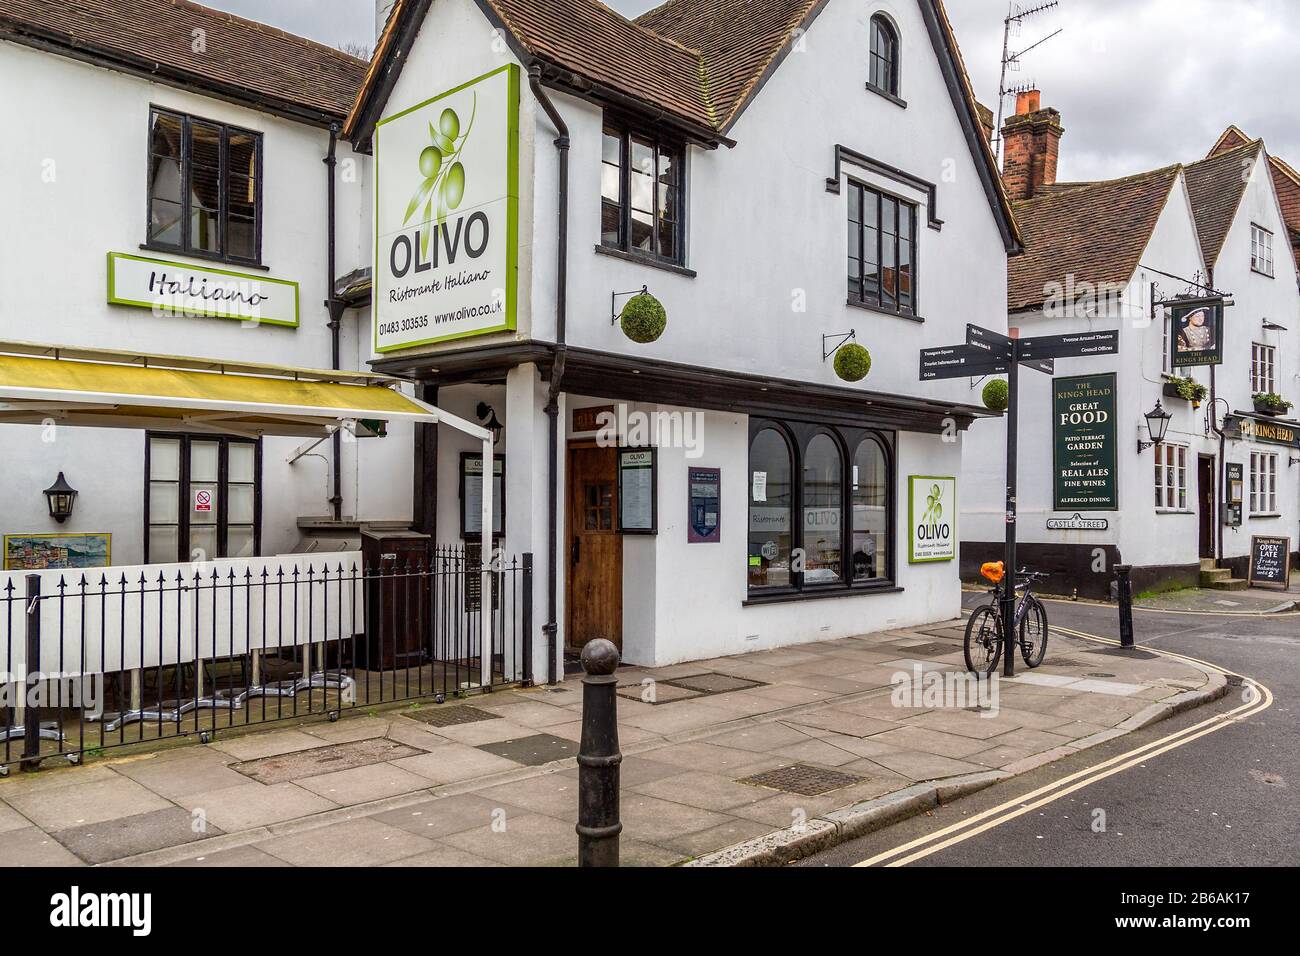 The Olivo restaurant, originally The old dispensary was Guildford's first medical centre, which opened in 1860. Guildford, Surrey, England. Stock Photo